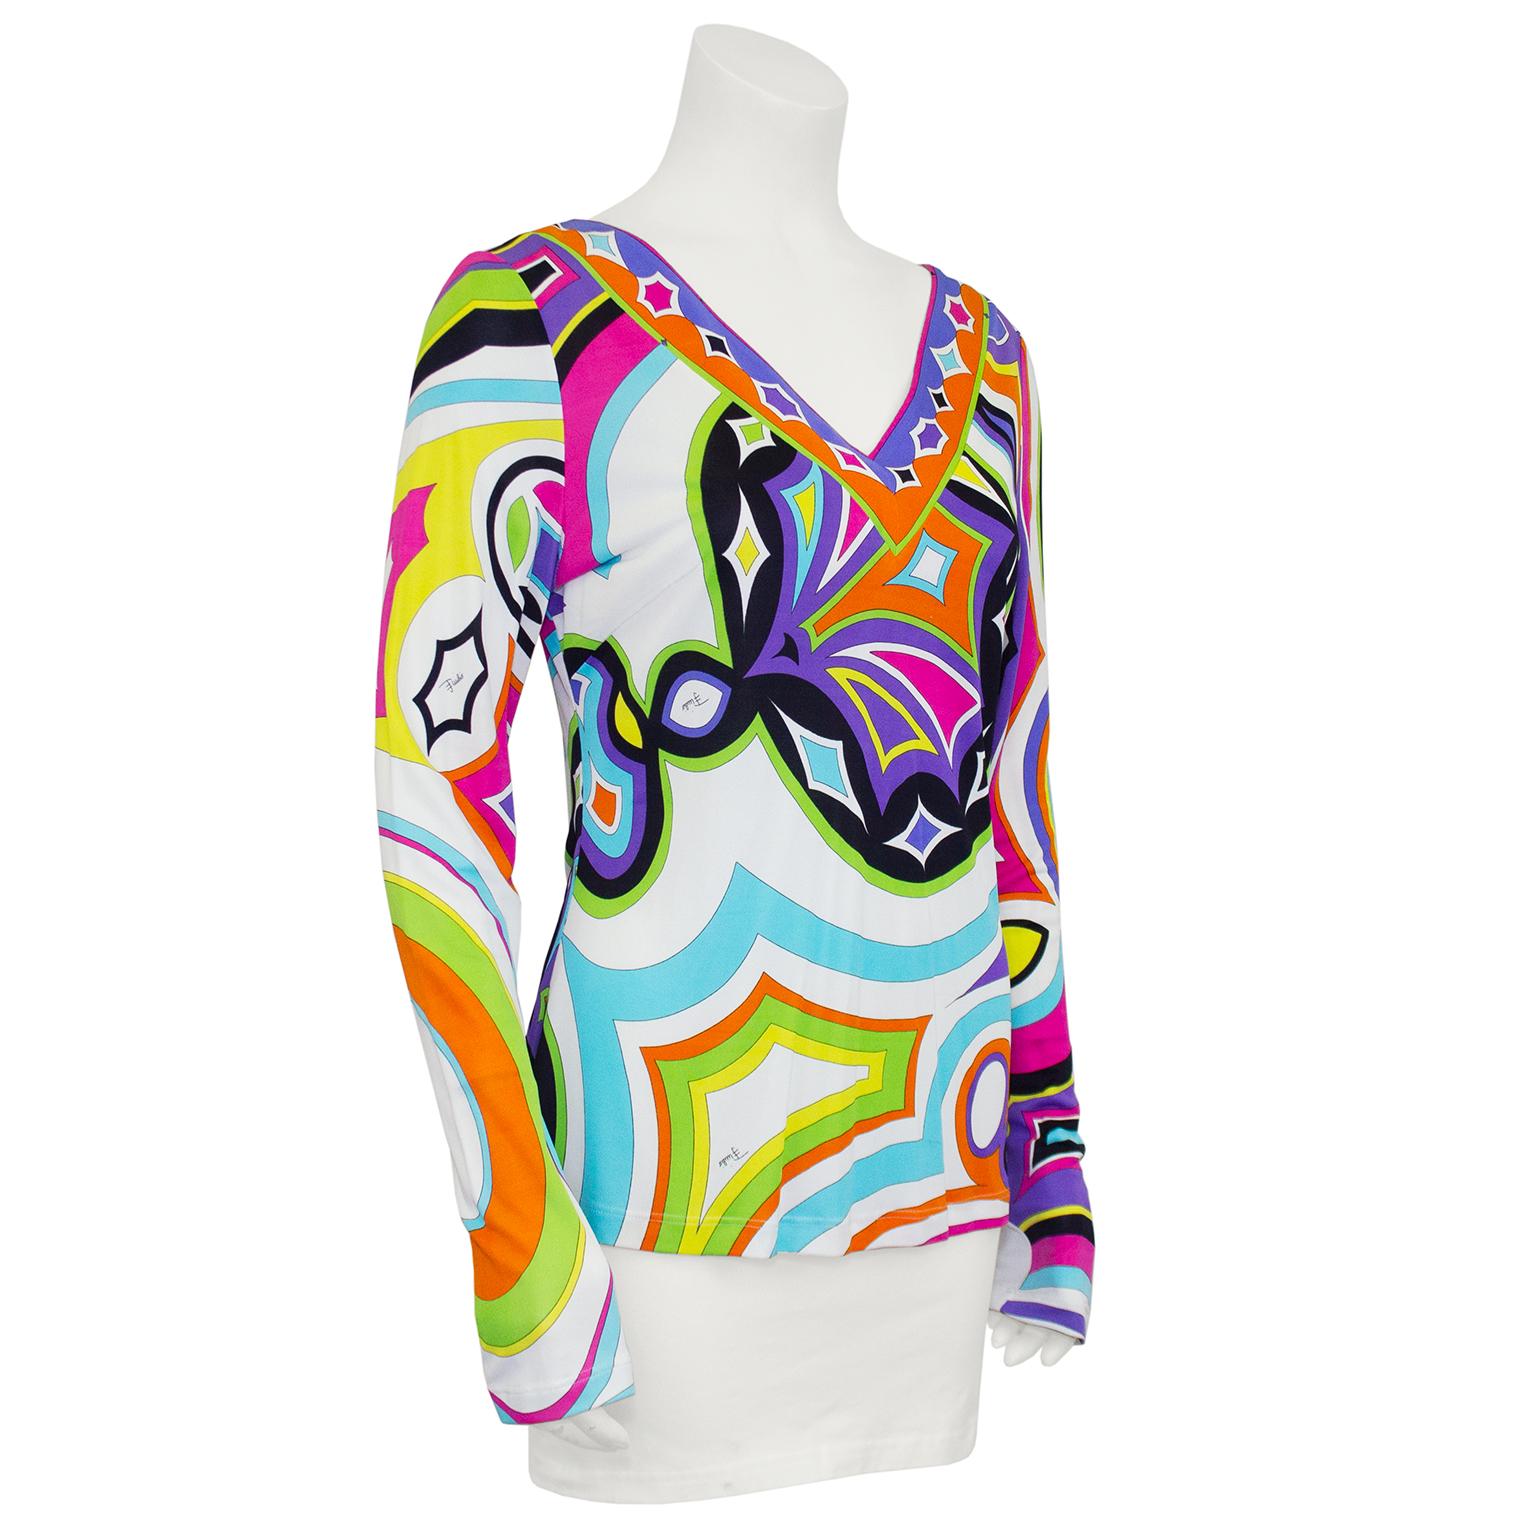 Fun & vibrant Emilio Pucci top from the 1990s. This top features the iconic Pucci abstract print in very bright colors. V neckline with long sleeves. Signed fabric, made in Italy. Fits like a US size 6. The perfect summer evening top. Dry cleaned